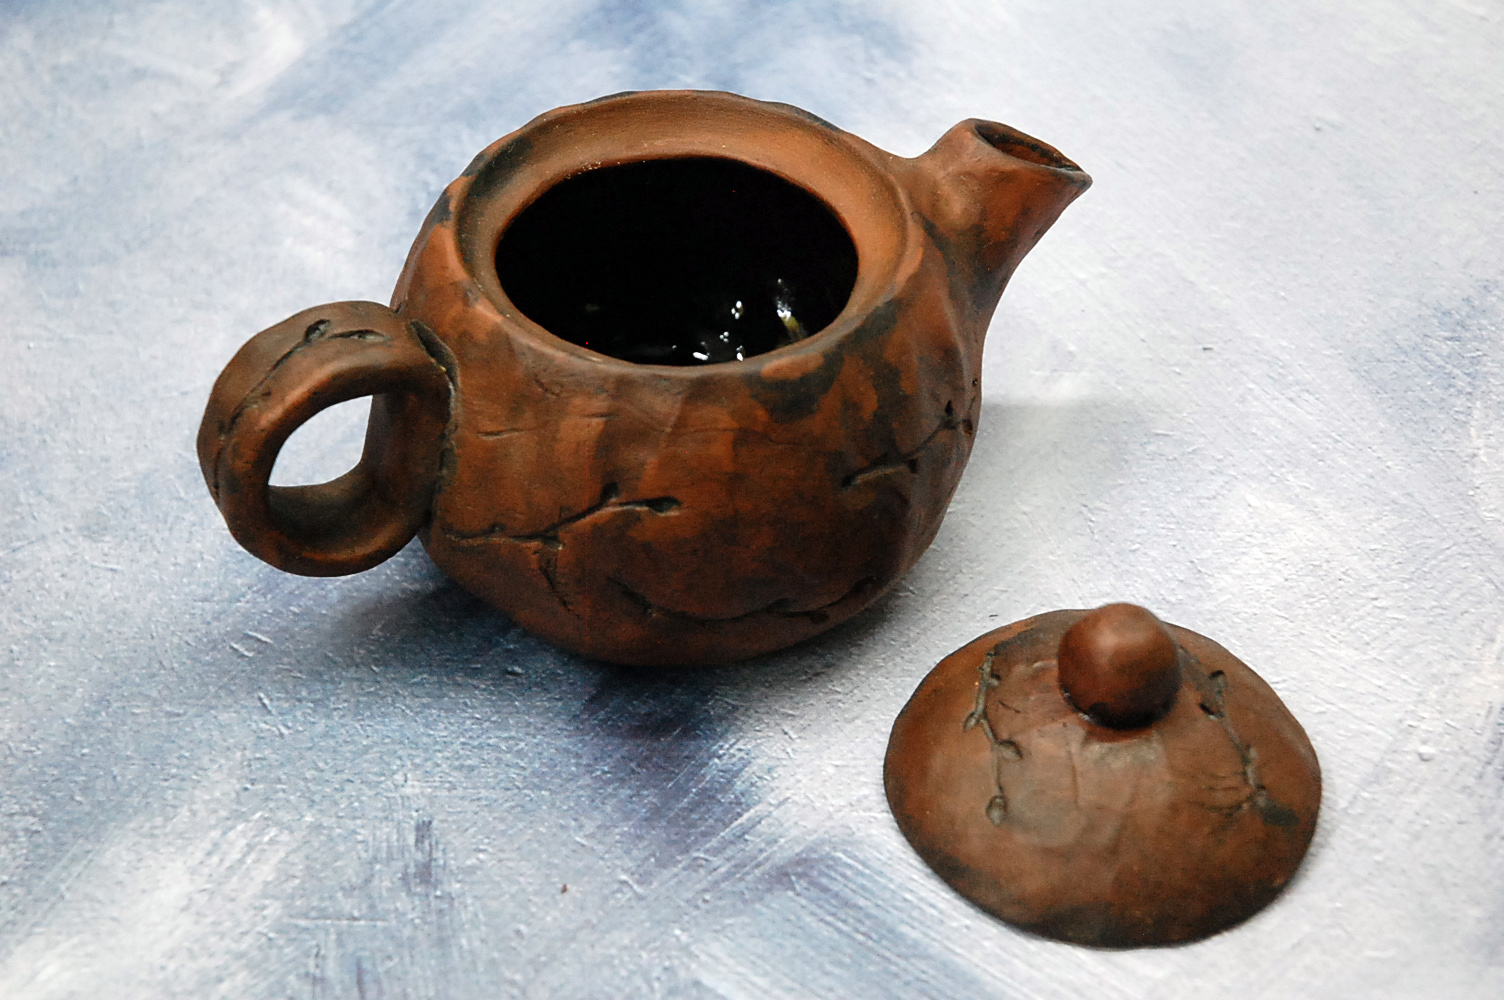 Spring pottery clay tea brewing pot or teapot for tea ceremony